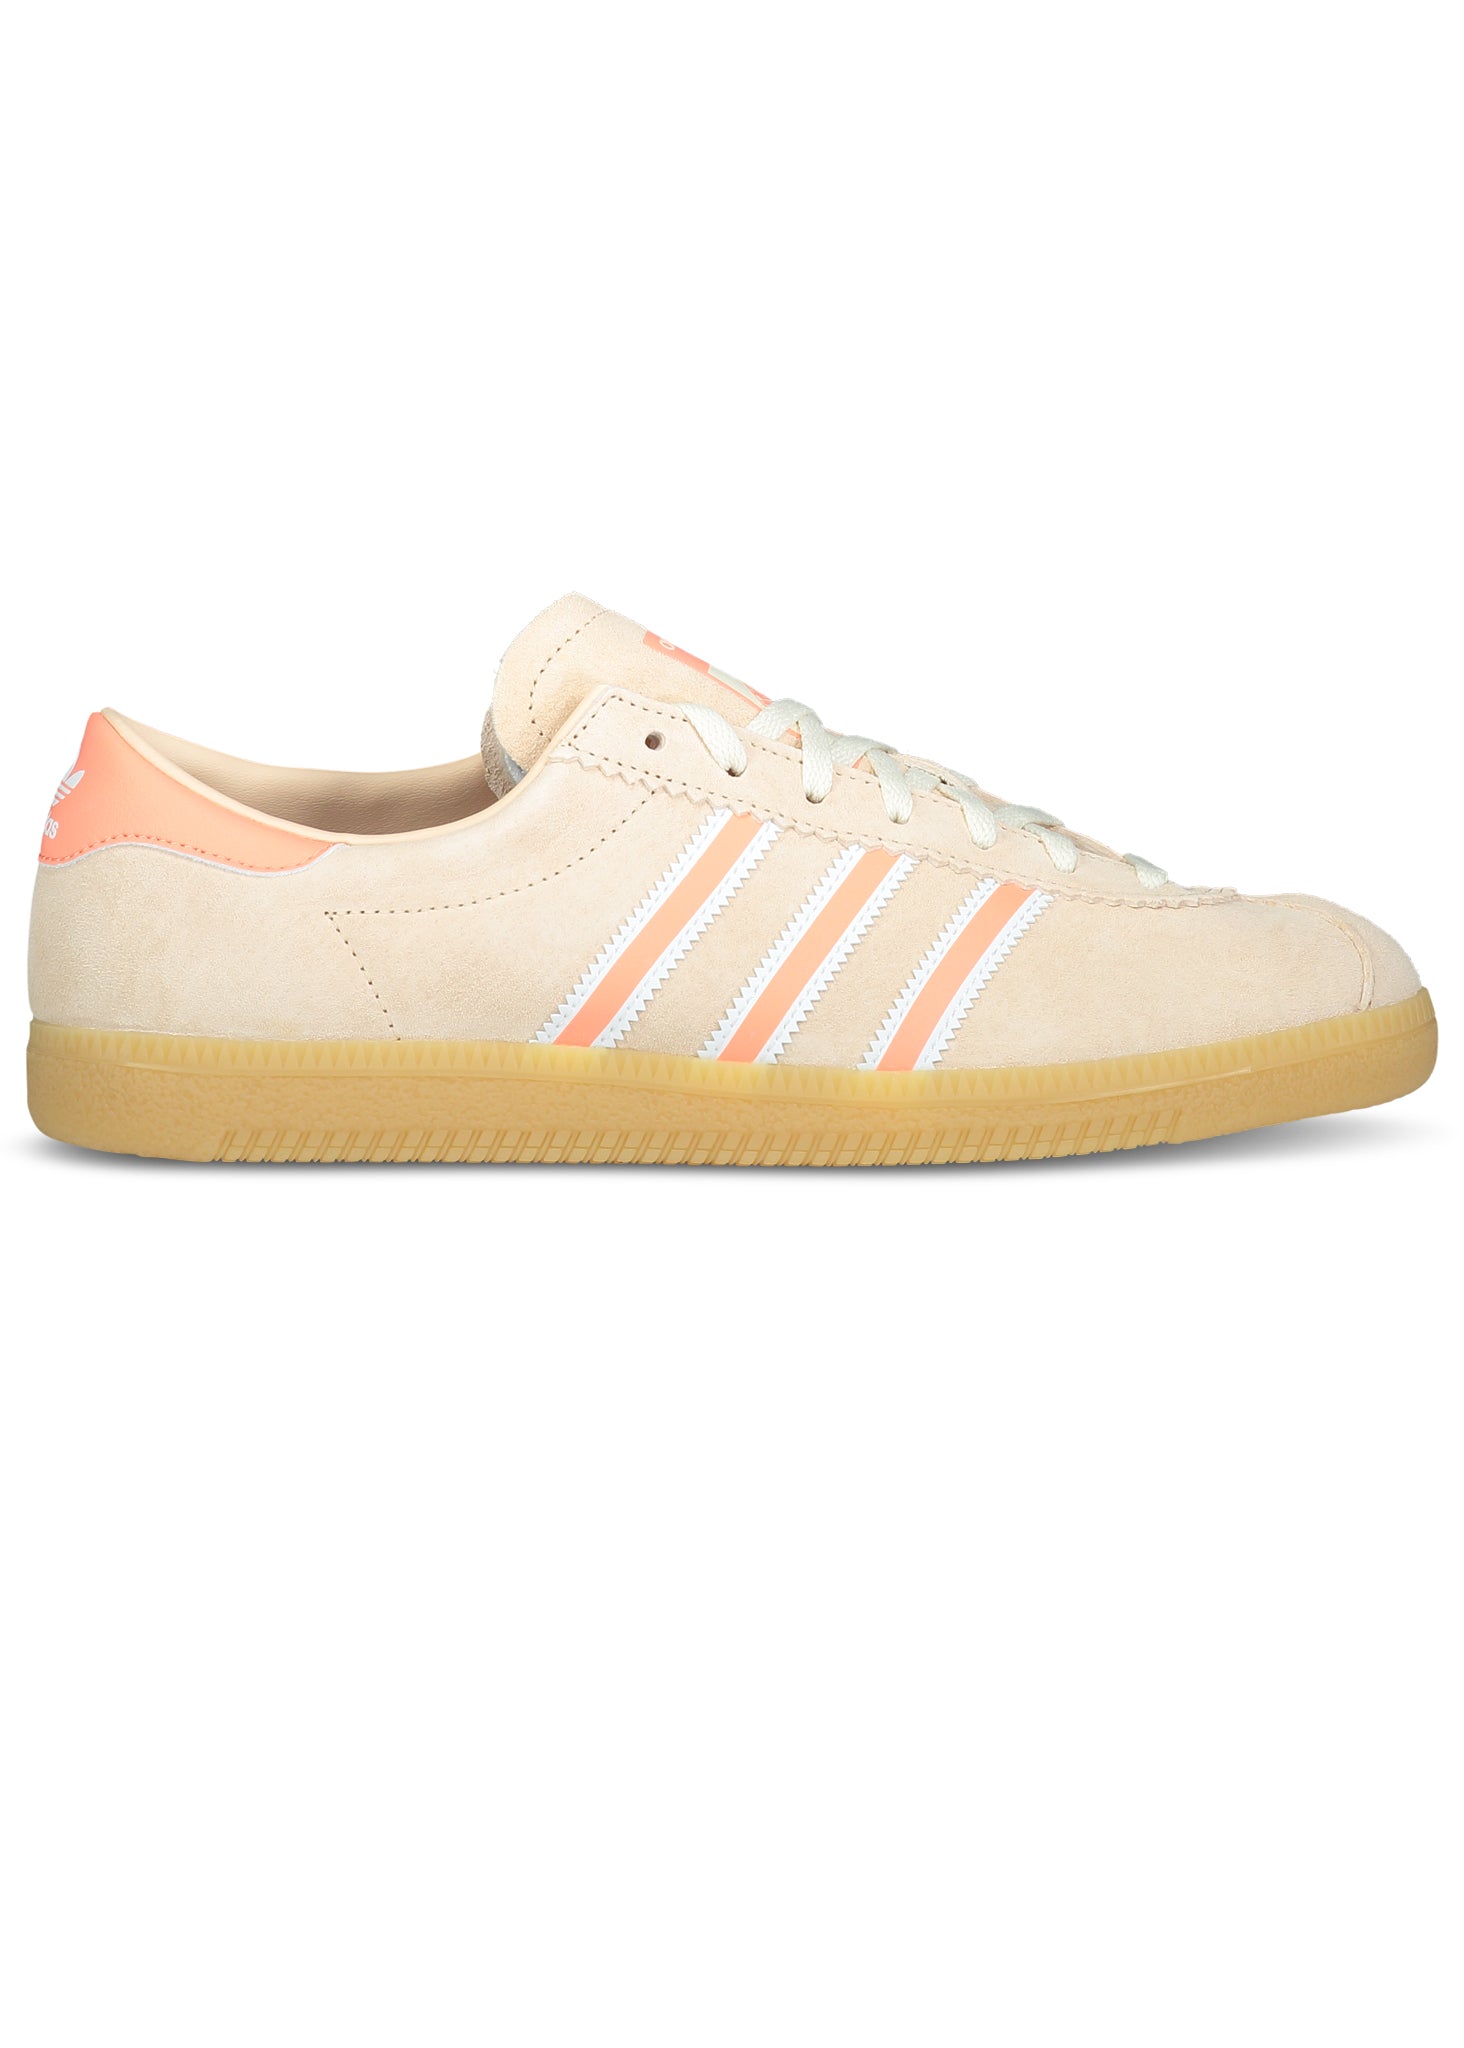 Adidas State Series MA - Corfus